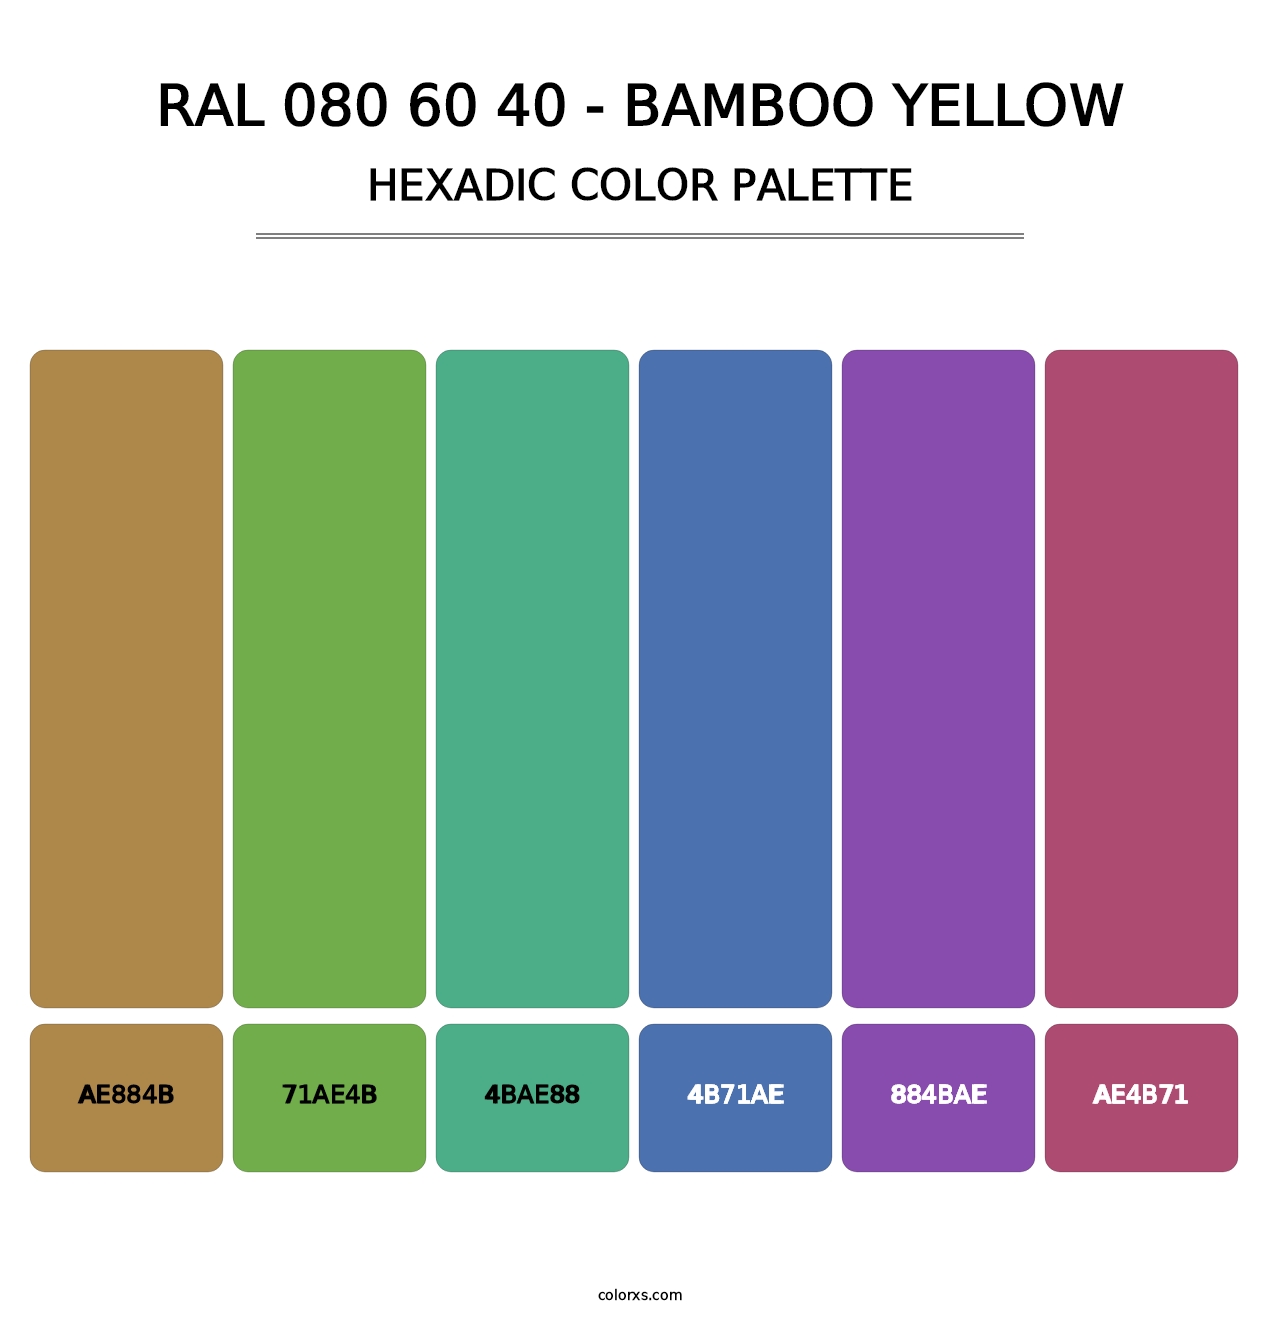 RAL 080 60 40 - Bamboo Yellow - Hexadic Color Palette